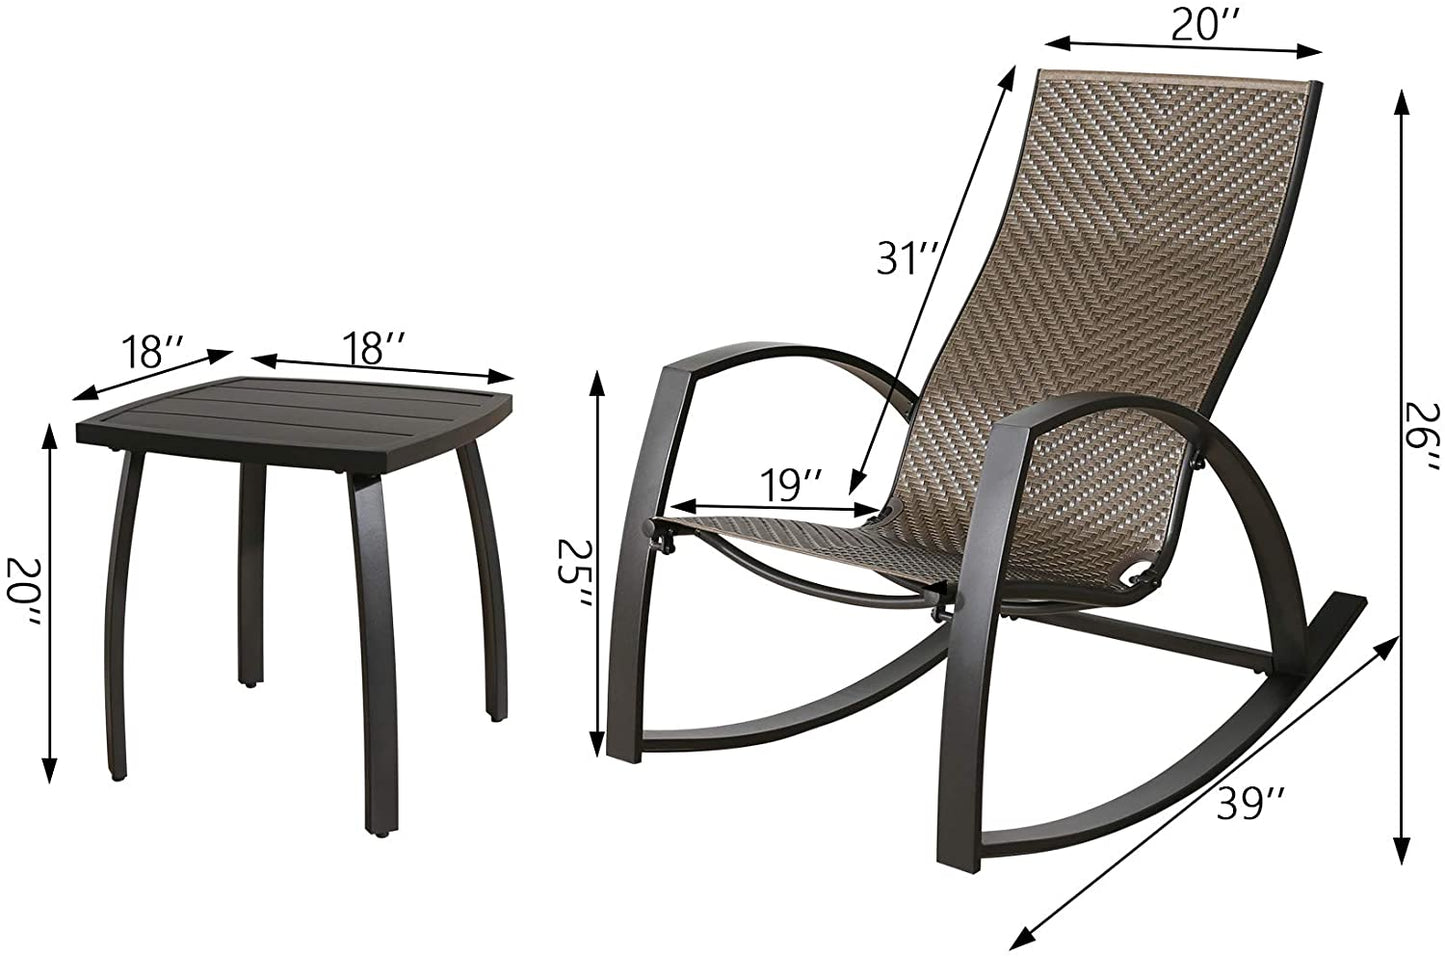 3 Piece Outdoor Wicker Bistro Set Patio Furniture Conversation Bistro Set with Wicker Rocking Chairs and Side Table